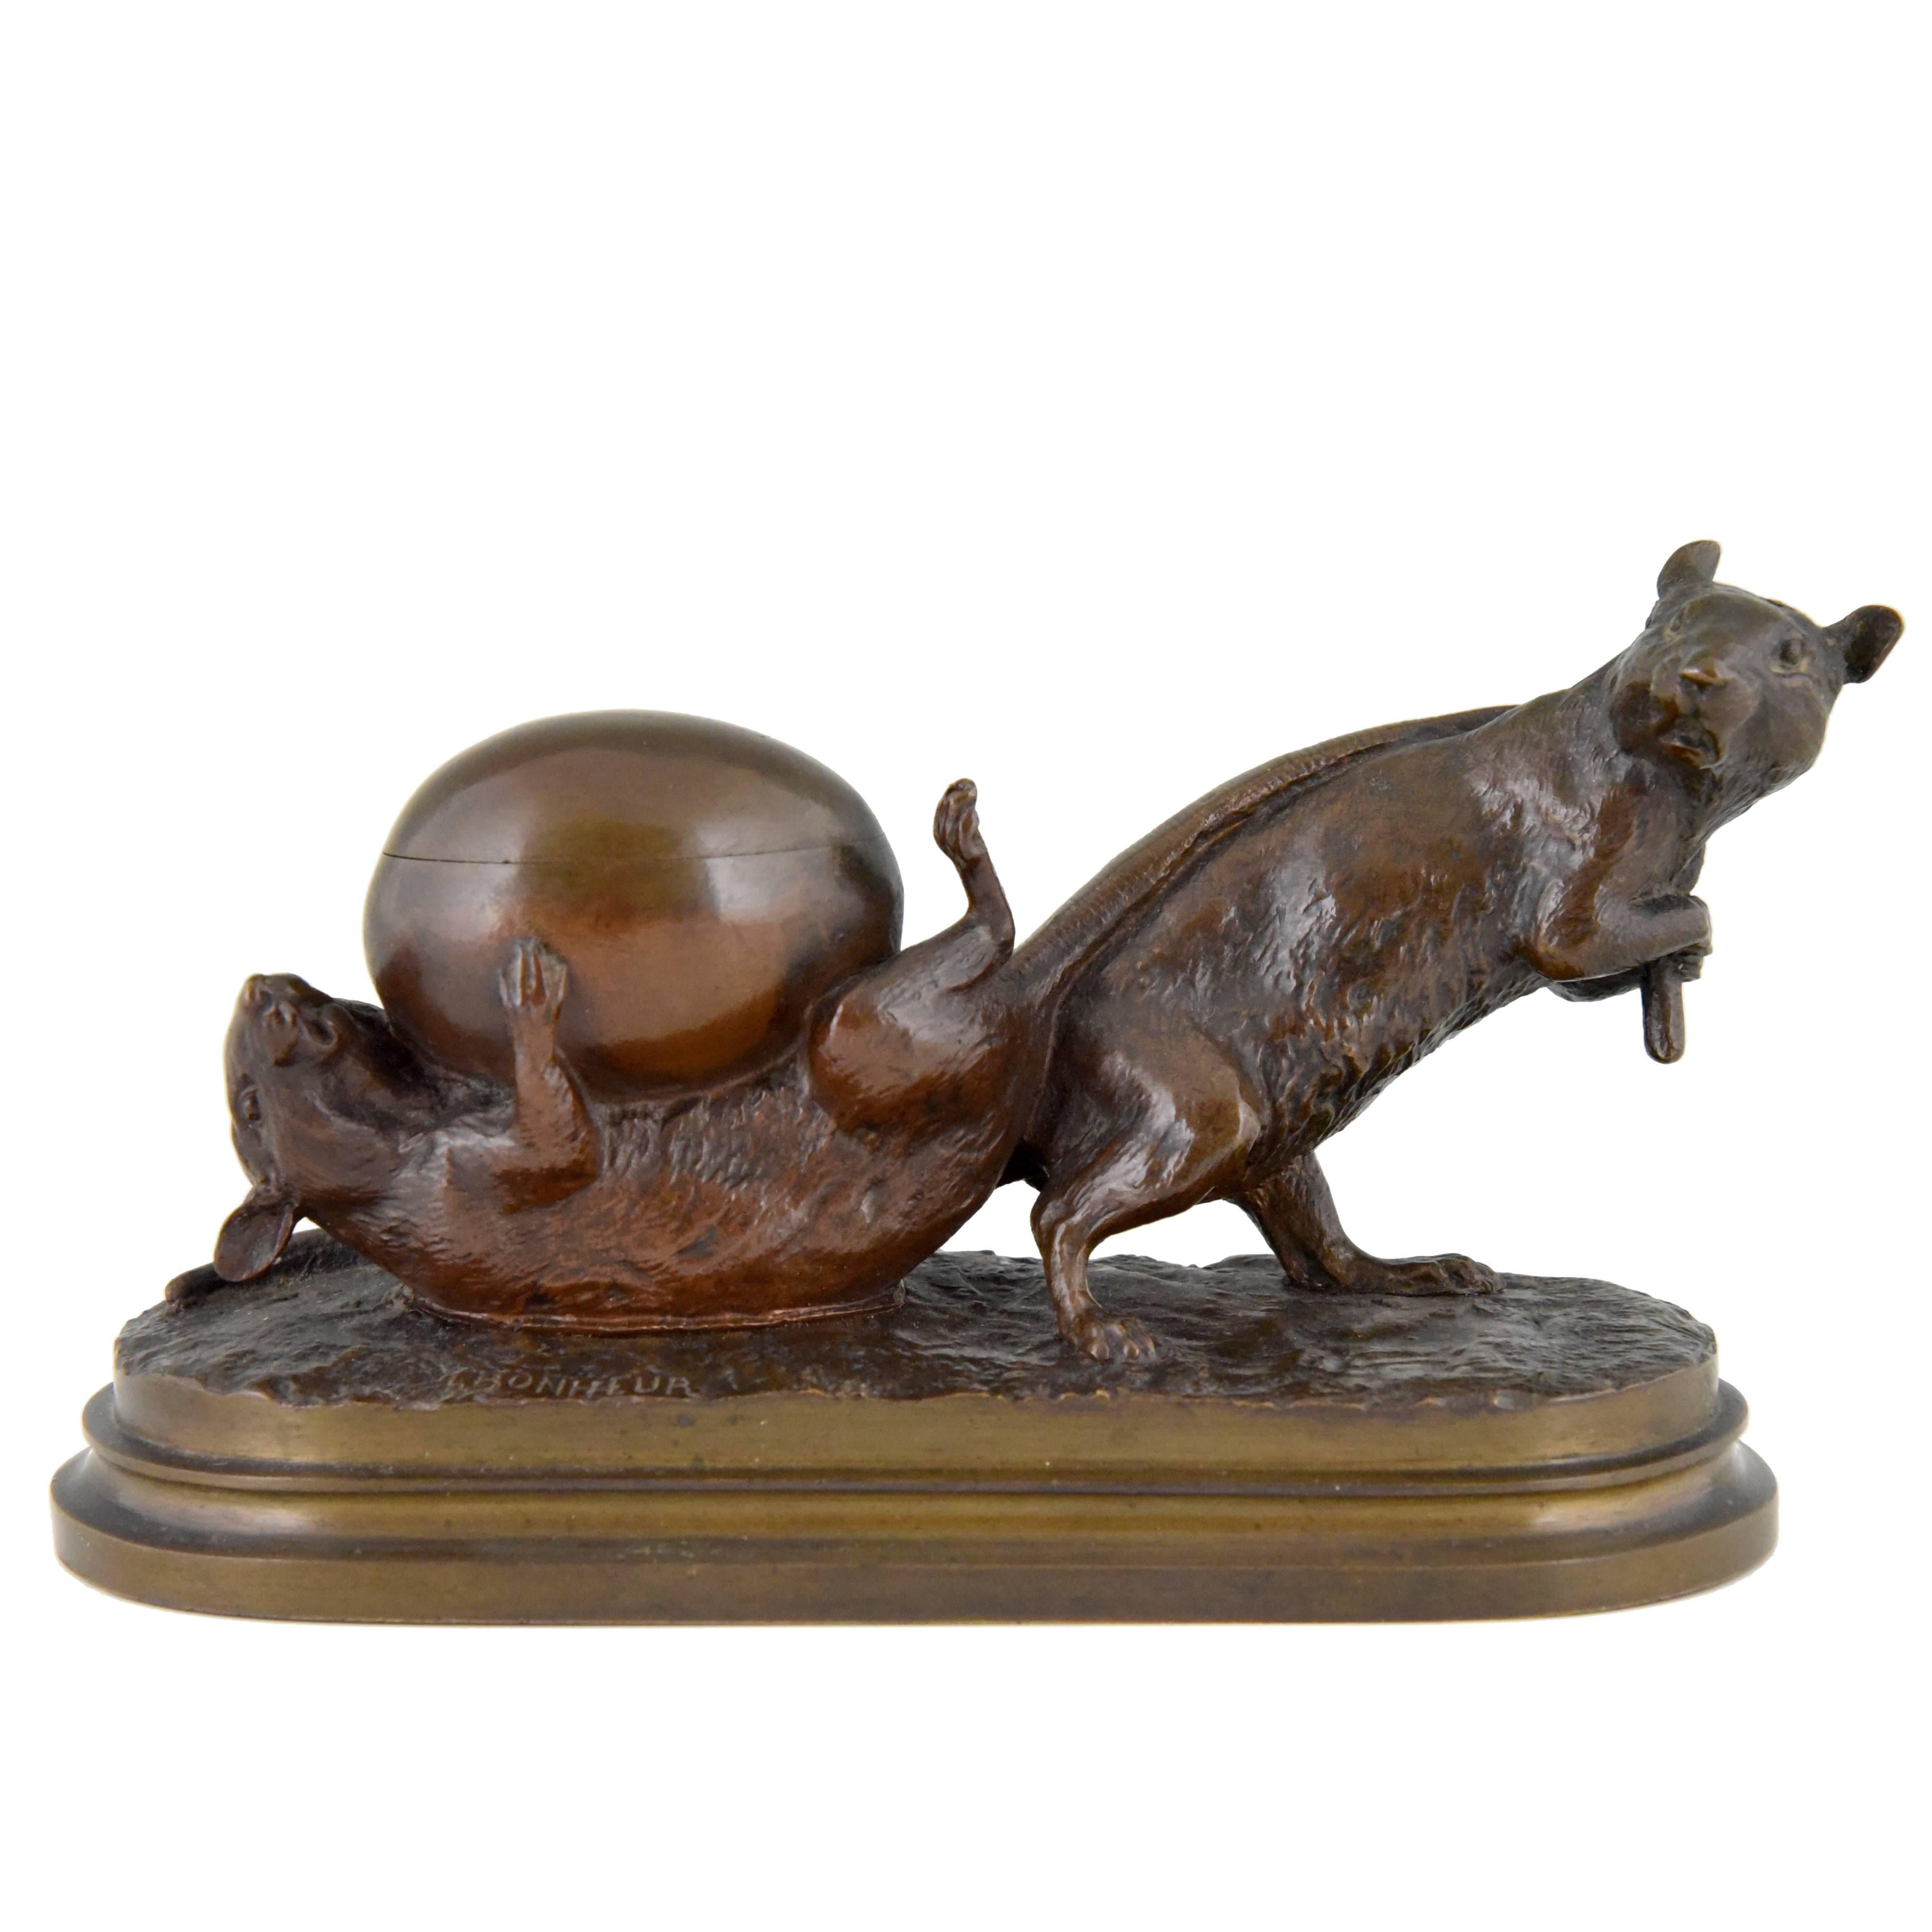 French Antique bronze sculpture of two mice & egg by Isidore Bonheur 1880